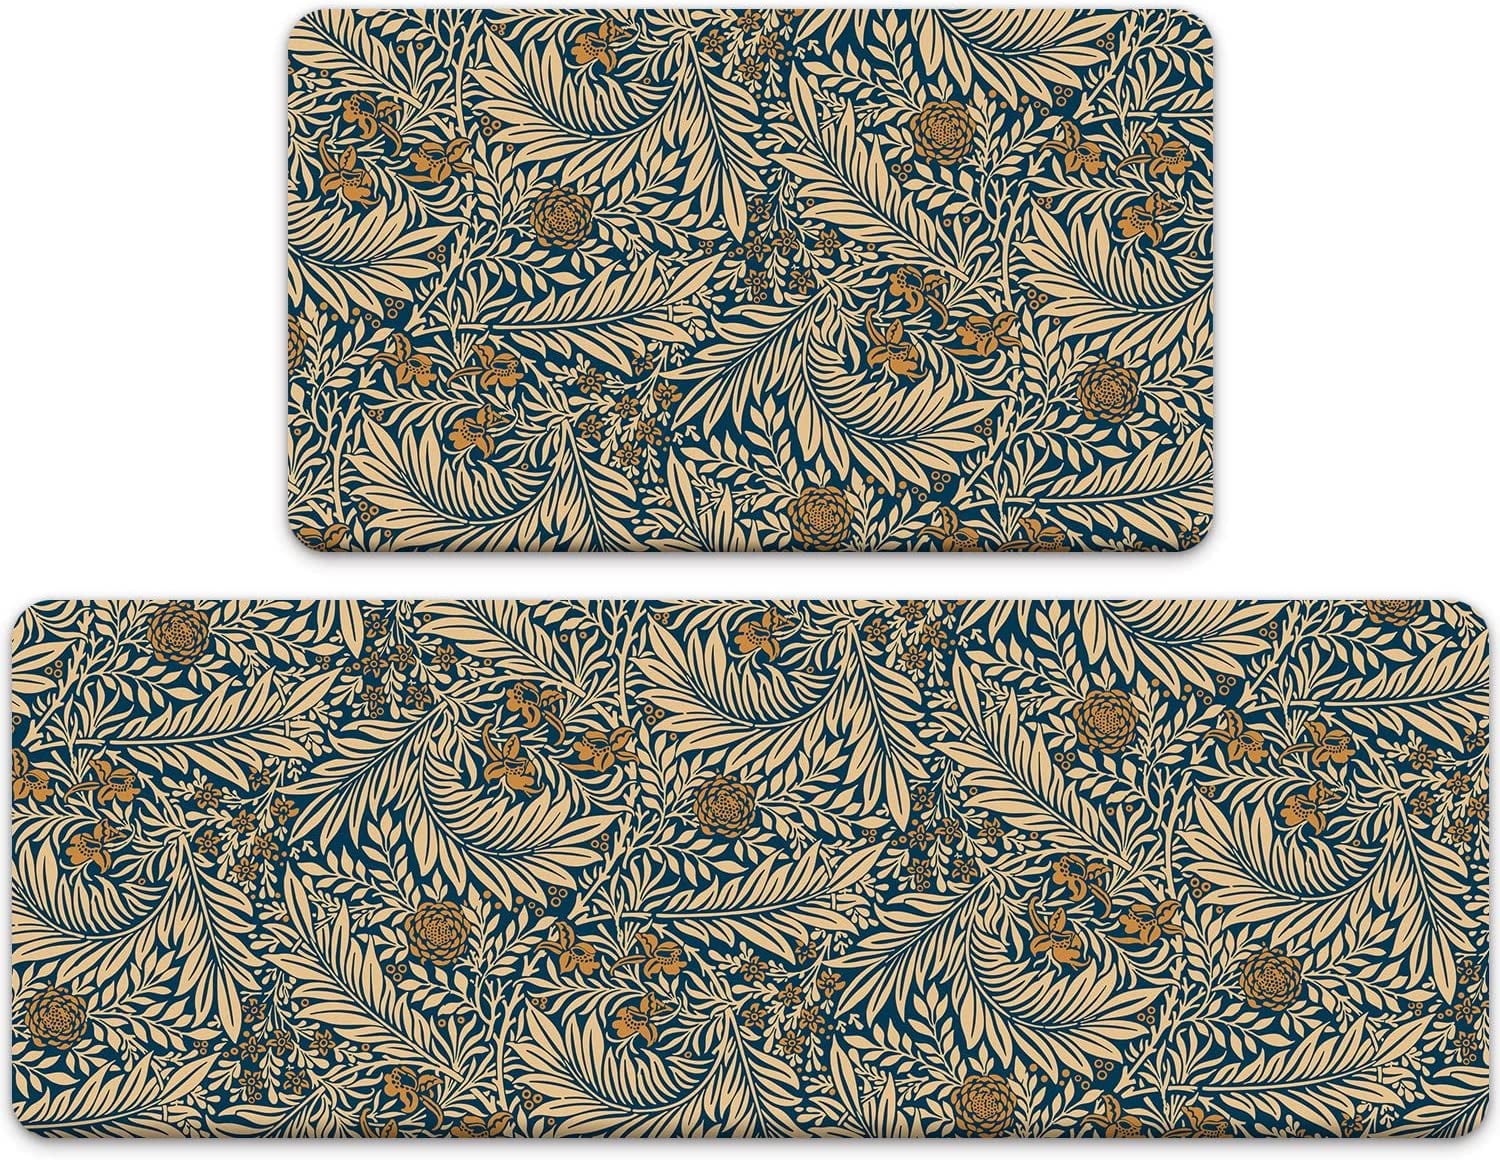 Witzest Farmhouse Brown Kitchen Rug Set of 2 - Comfort Anti-Fatigue Non  Slip Mats, Washable Memory Foam Cushioned Kitchen Mats for Sink, Floor, and